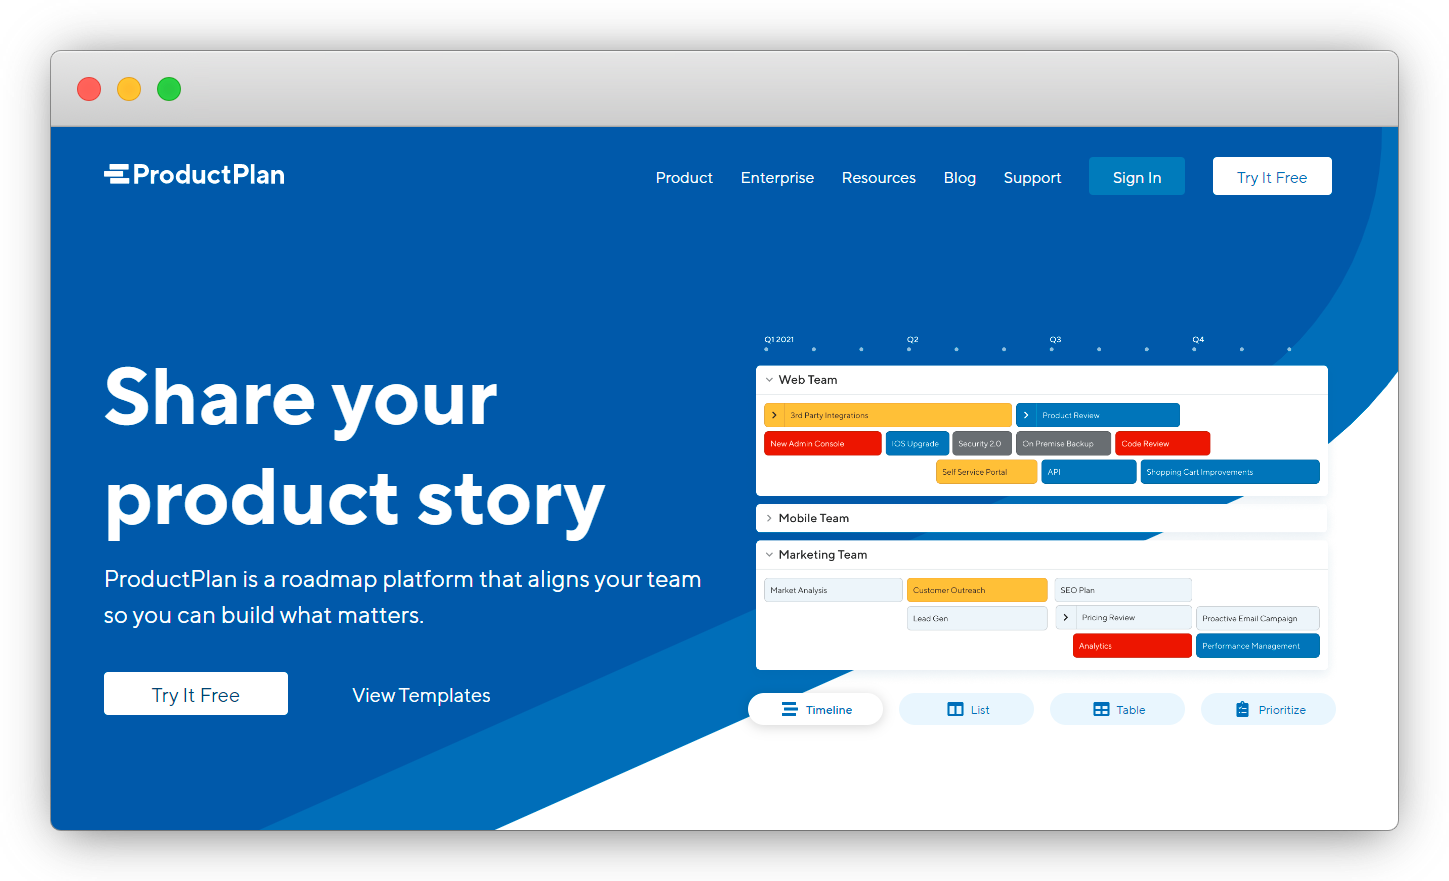 ProductPlan, a Roadmapping and Product Management tool